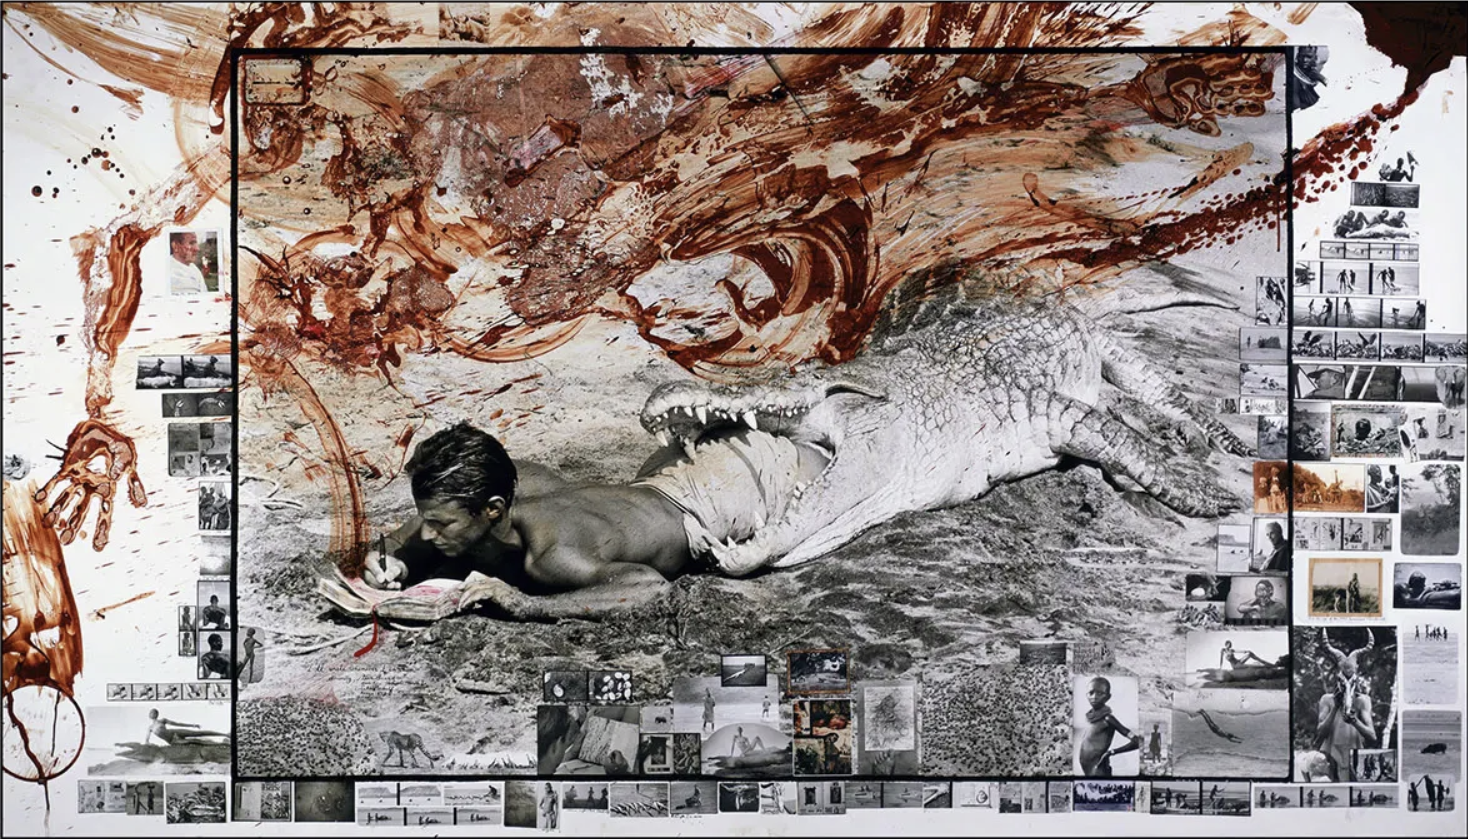 Peter Beard pretending to lay down in the mouth of an alligator